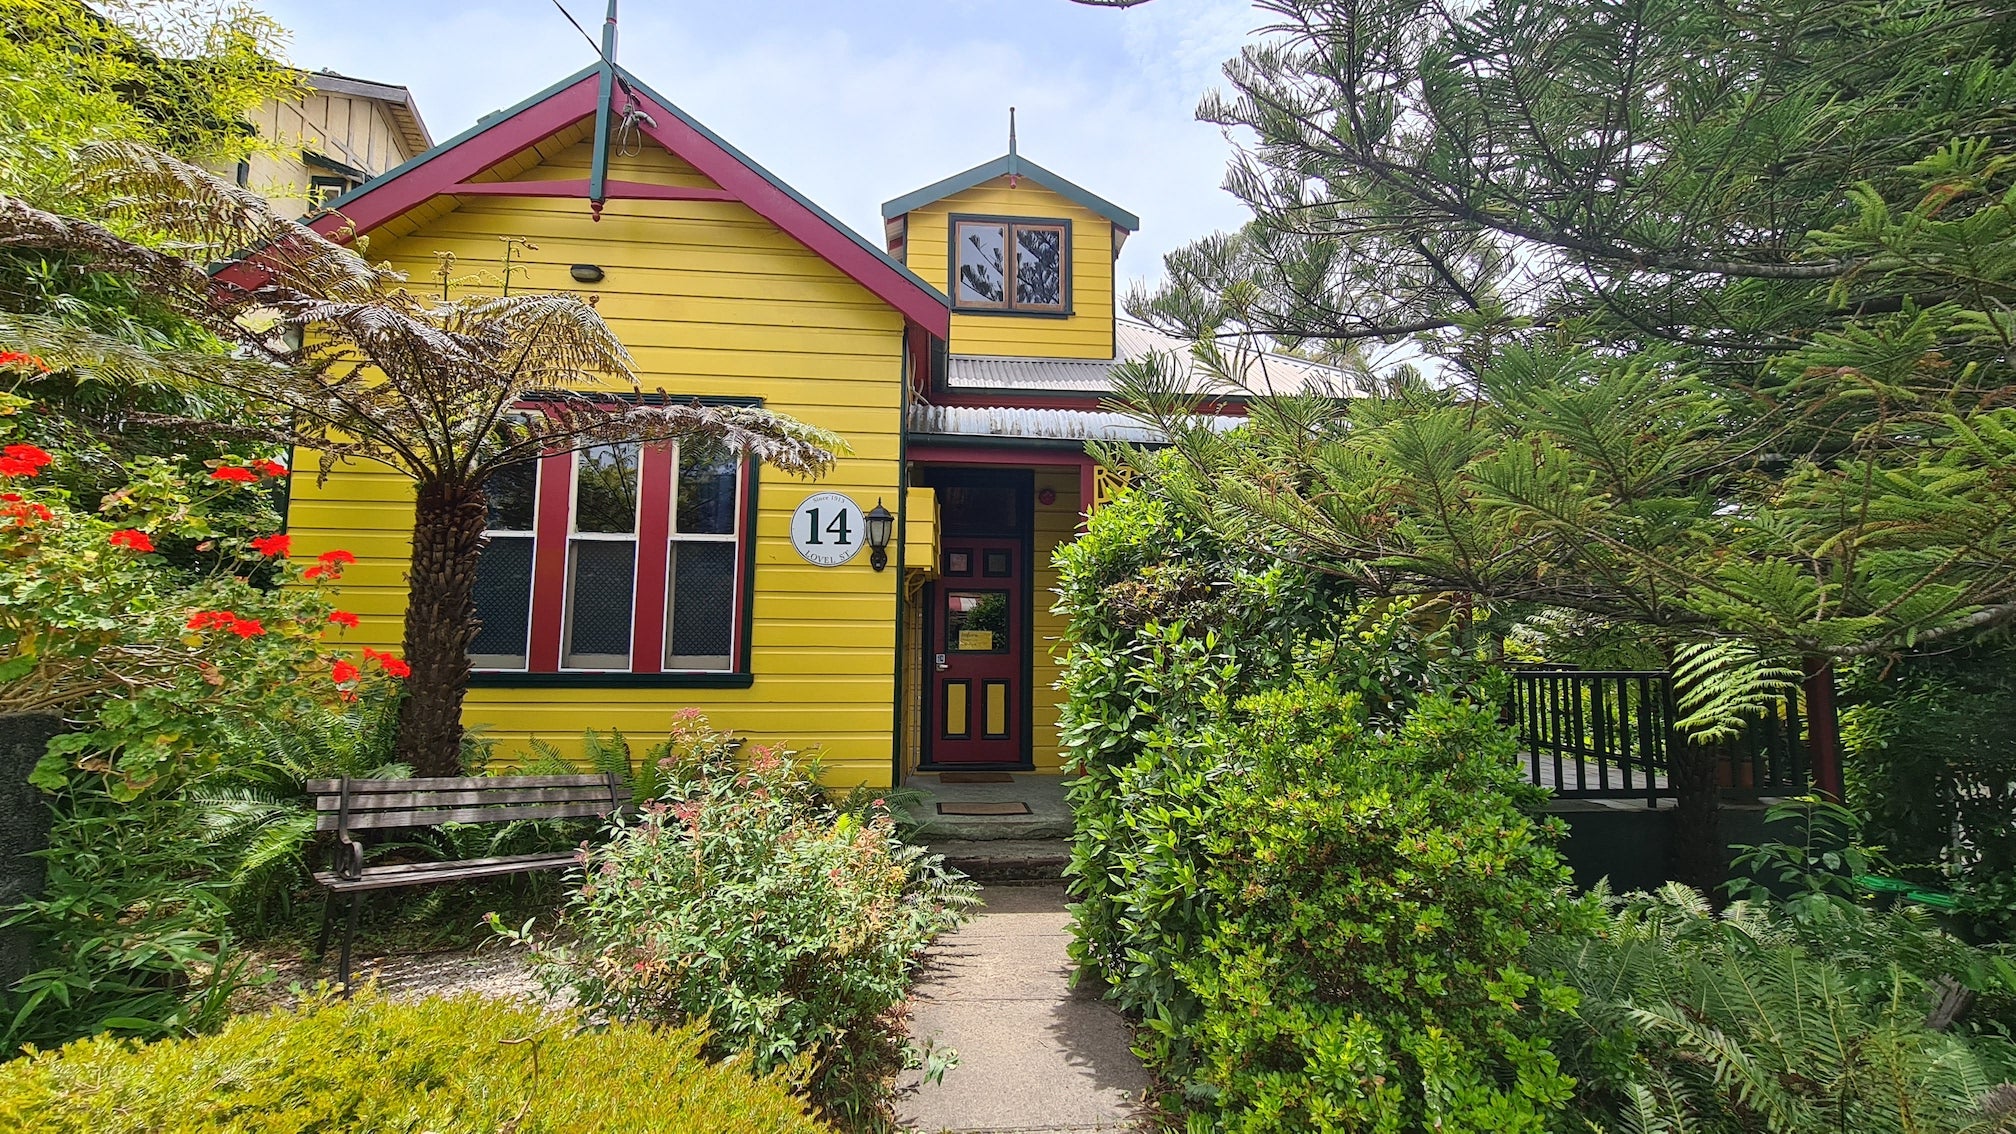 No.14 Lovel St guesthouse in Blue Mountains, Australia